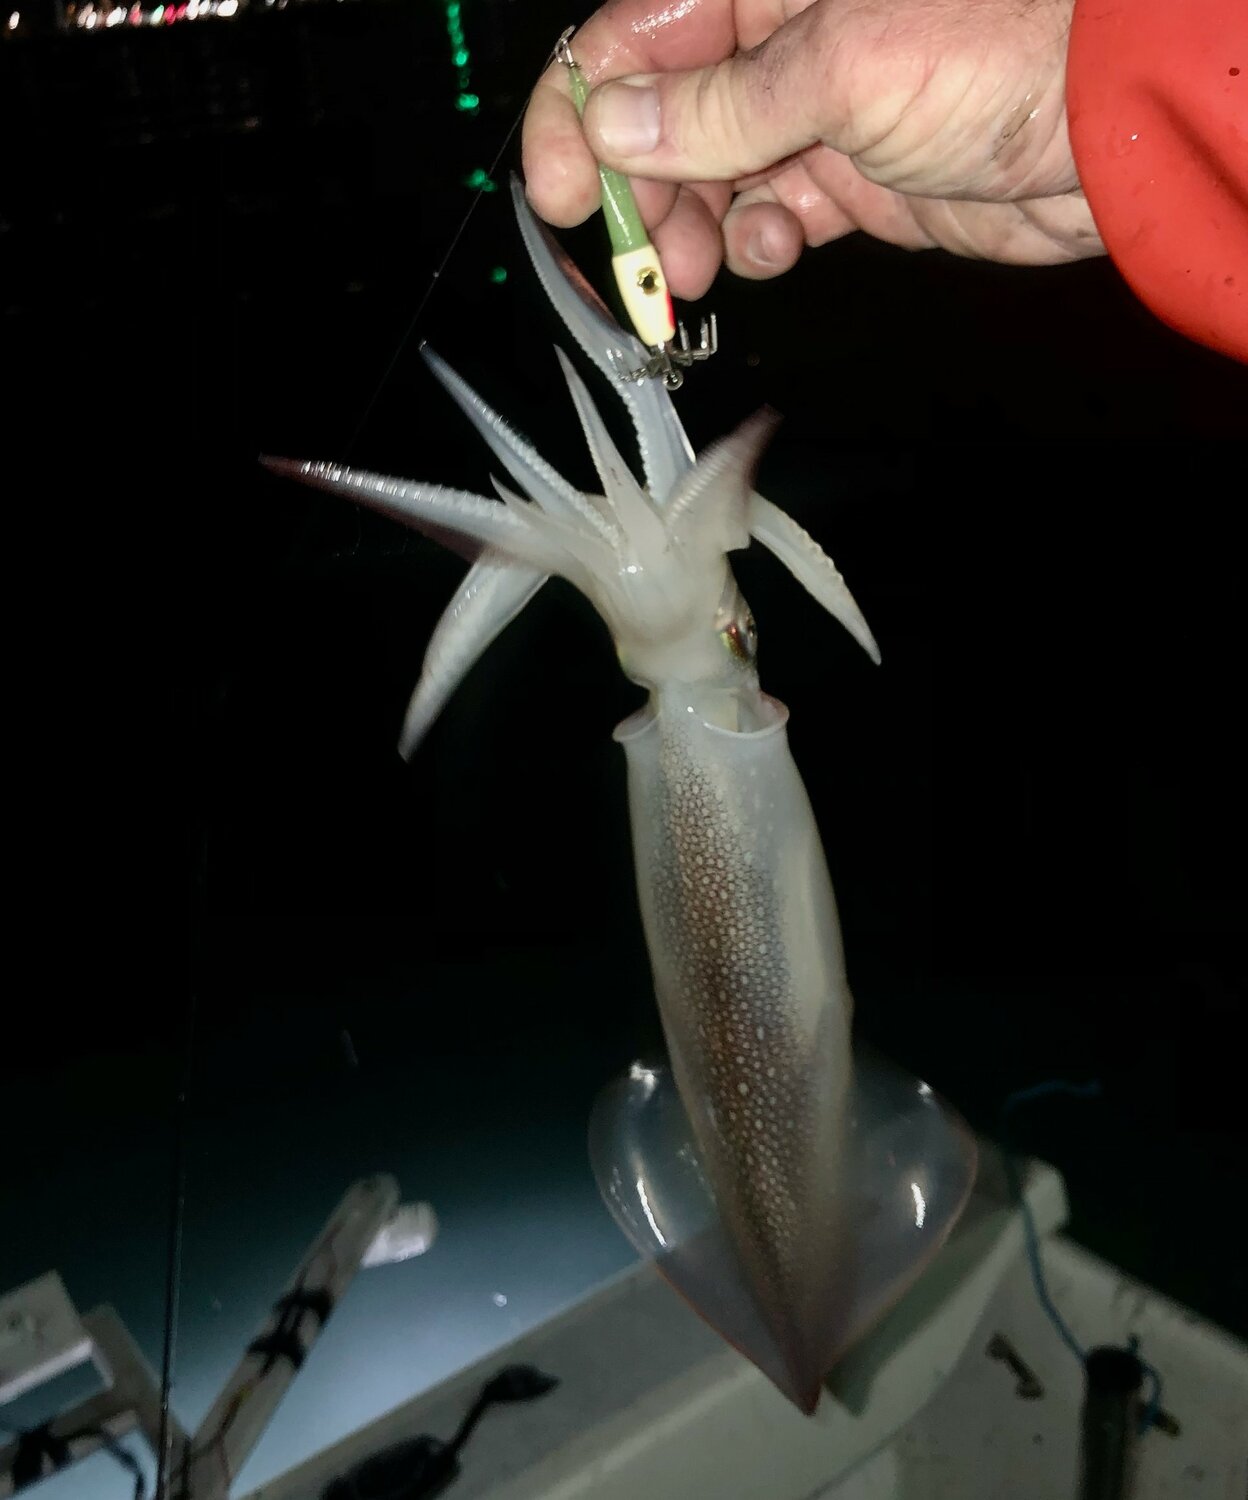 Squid jig with a Newport area squid caught by Greg Vespe earlier this week.